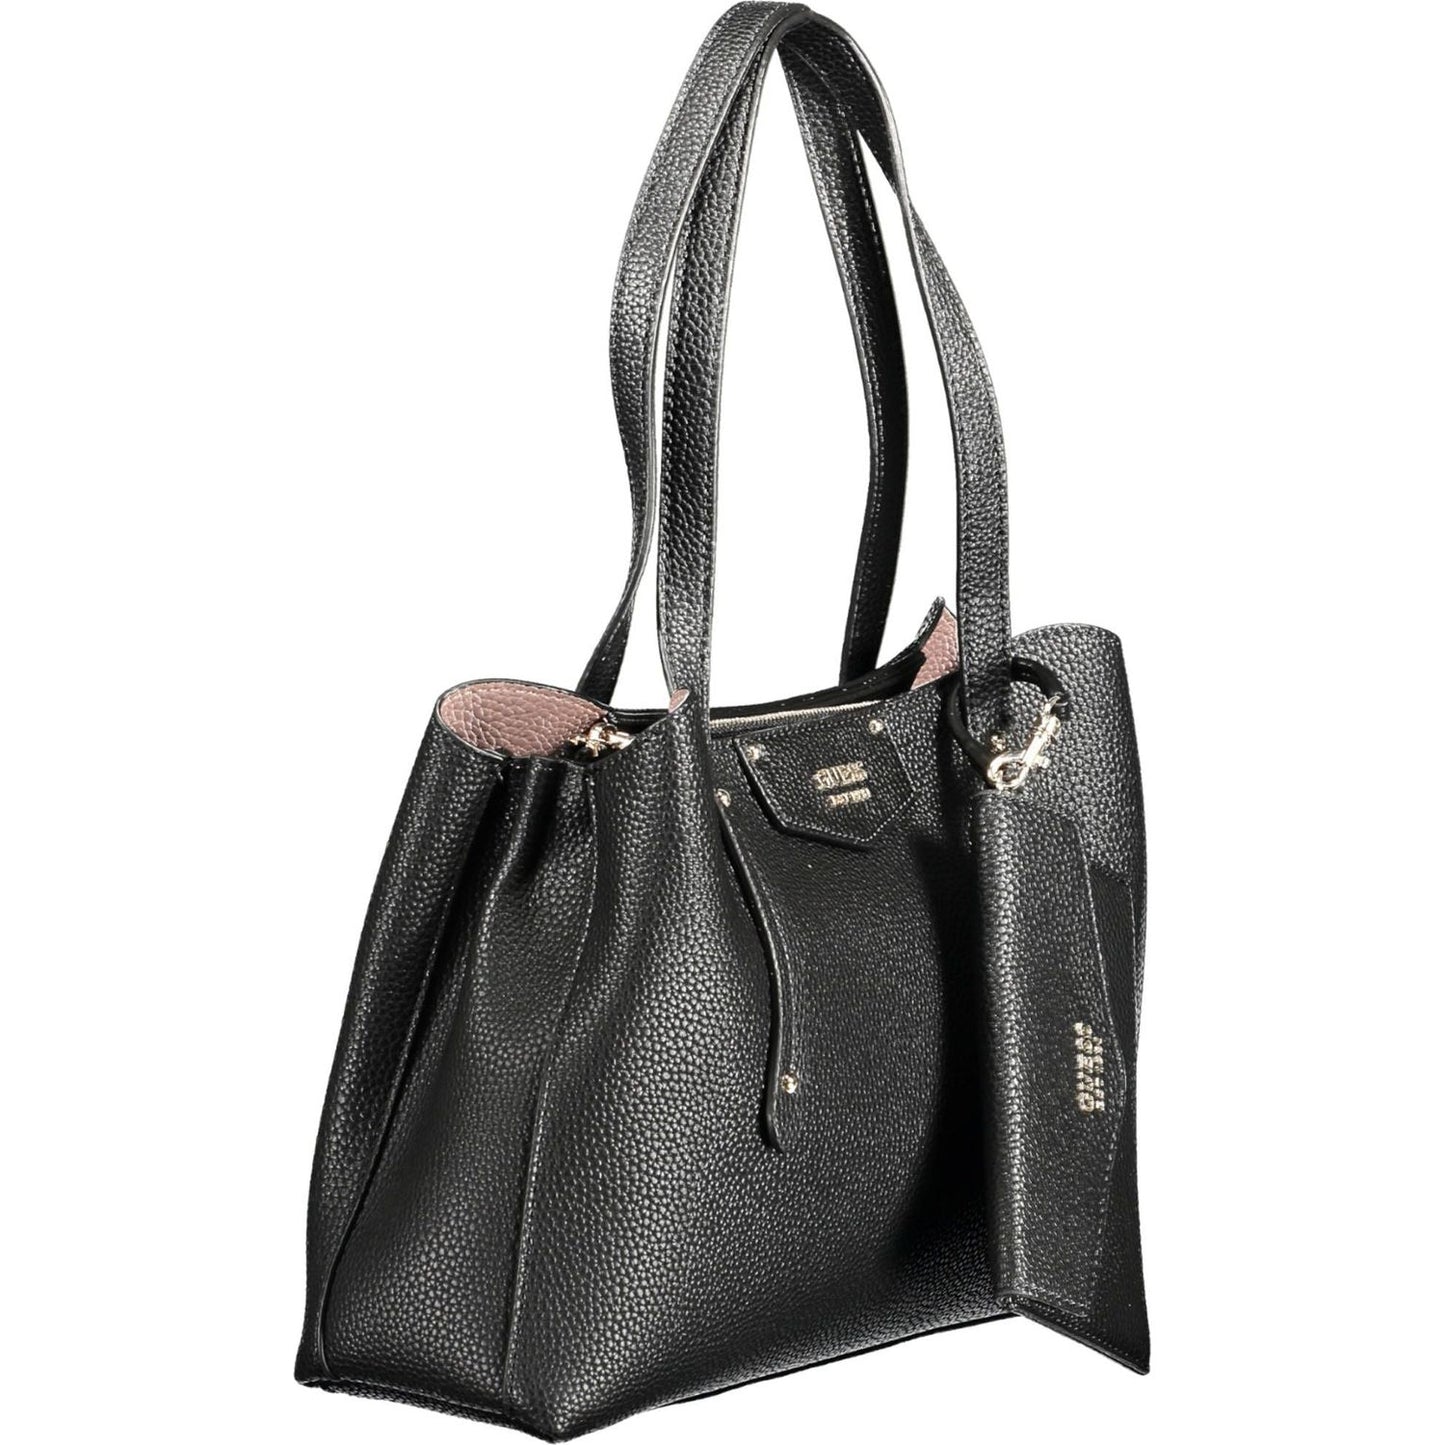 Guess Jeans Chic Black Dual-Compartment Handbag chic-black-dual-compartment-handbag